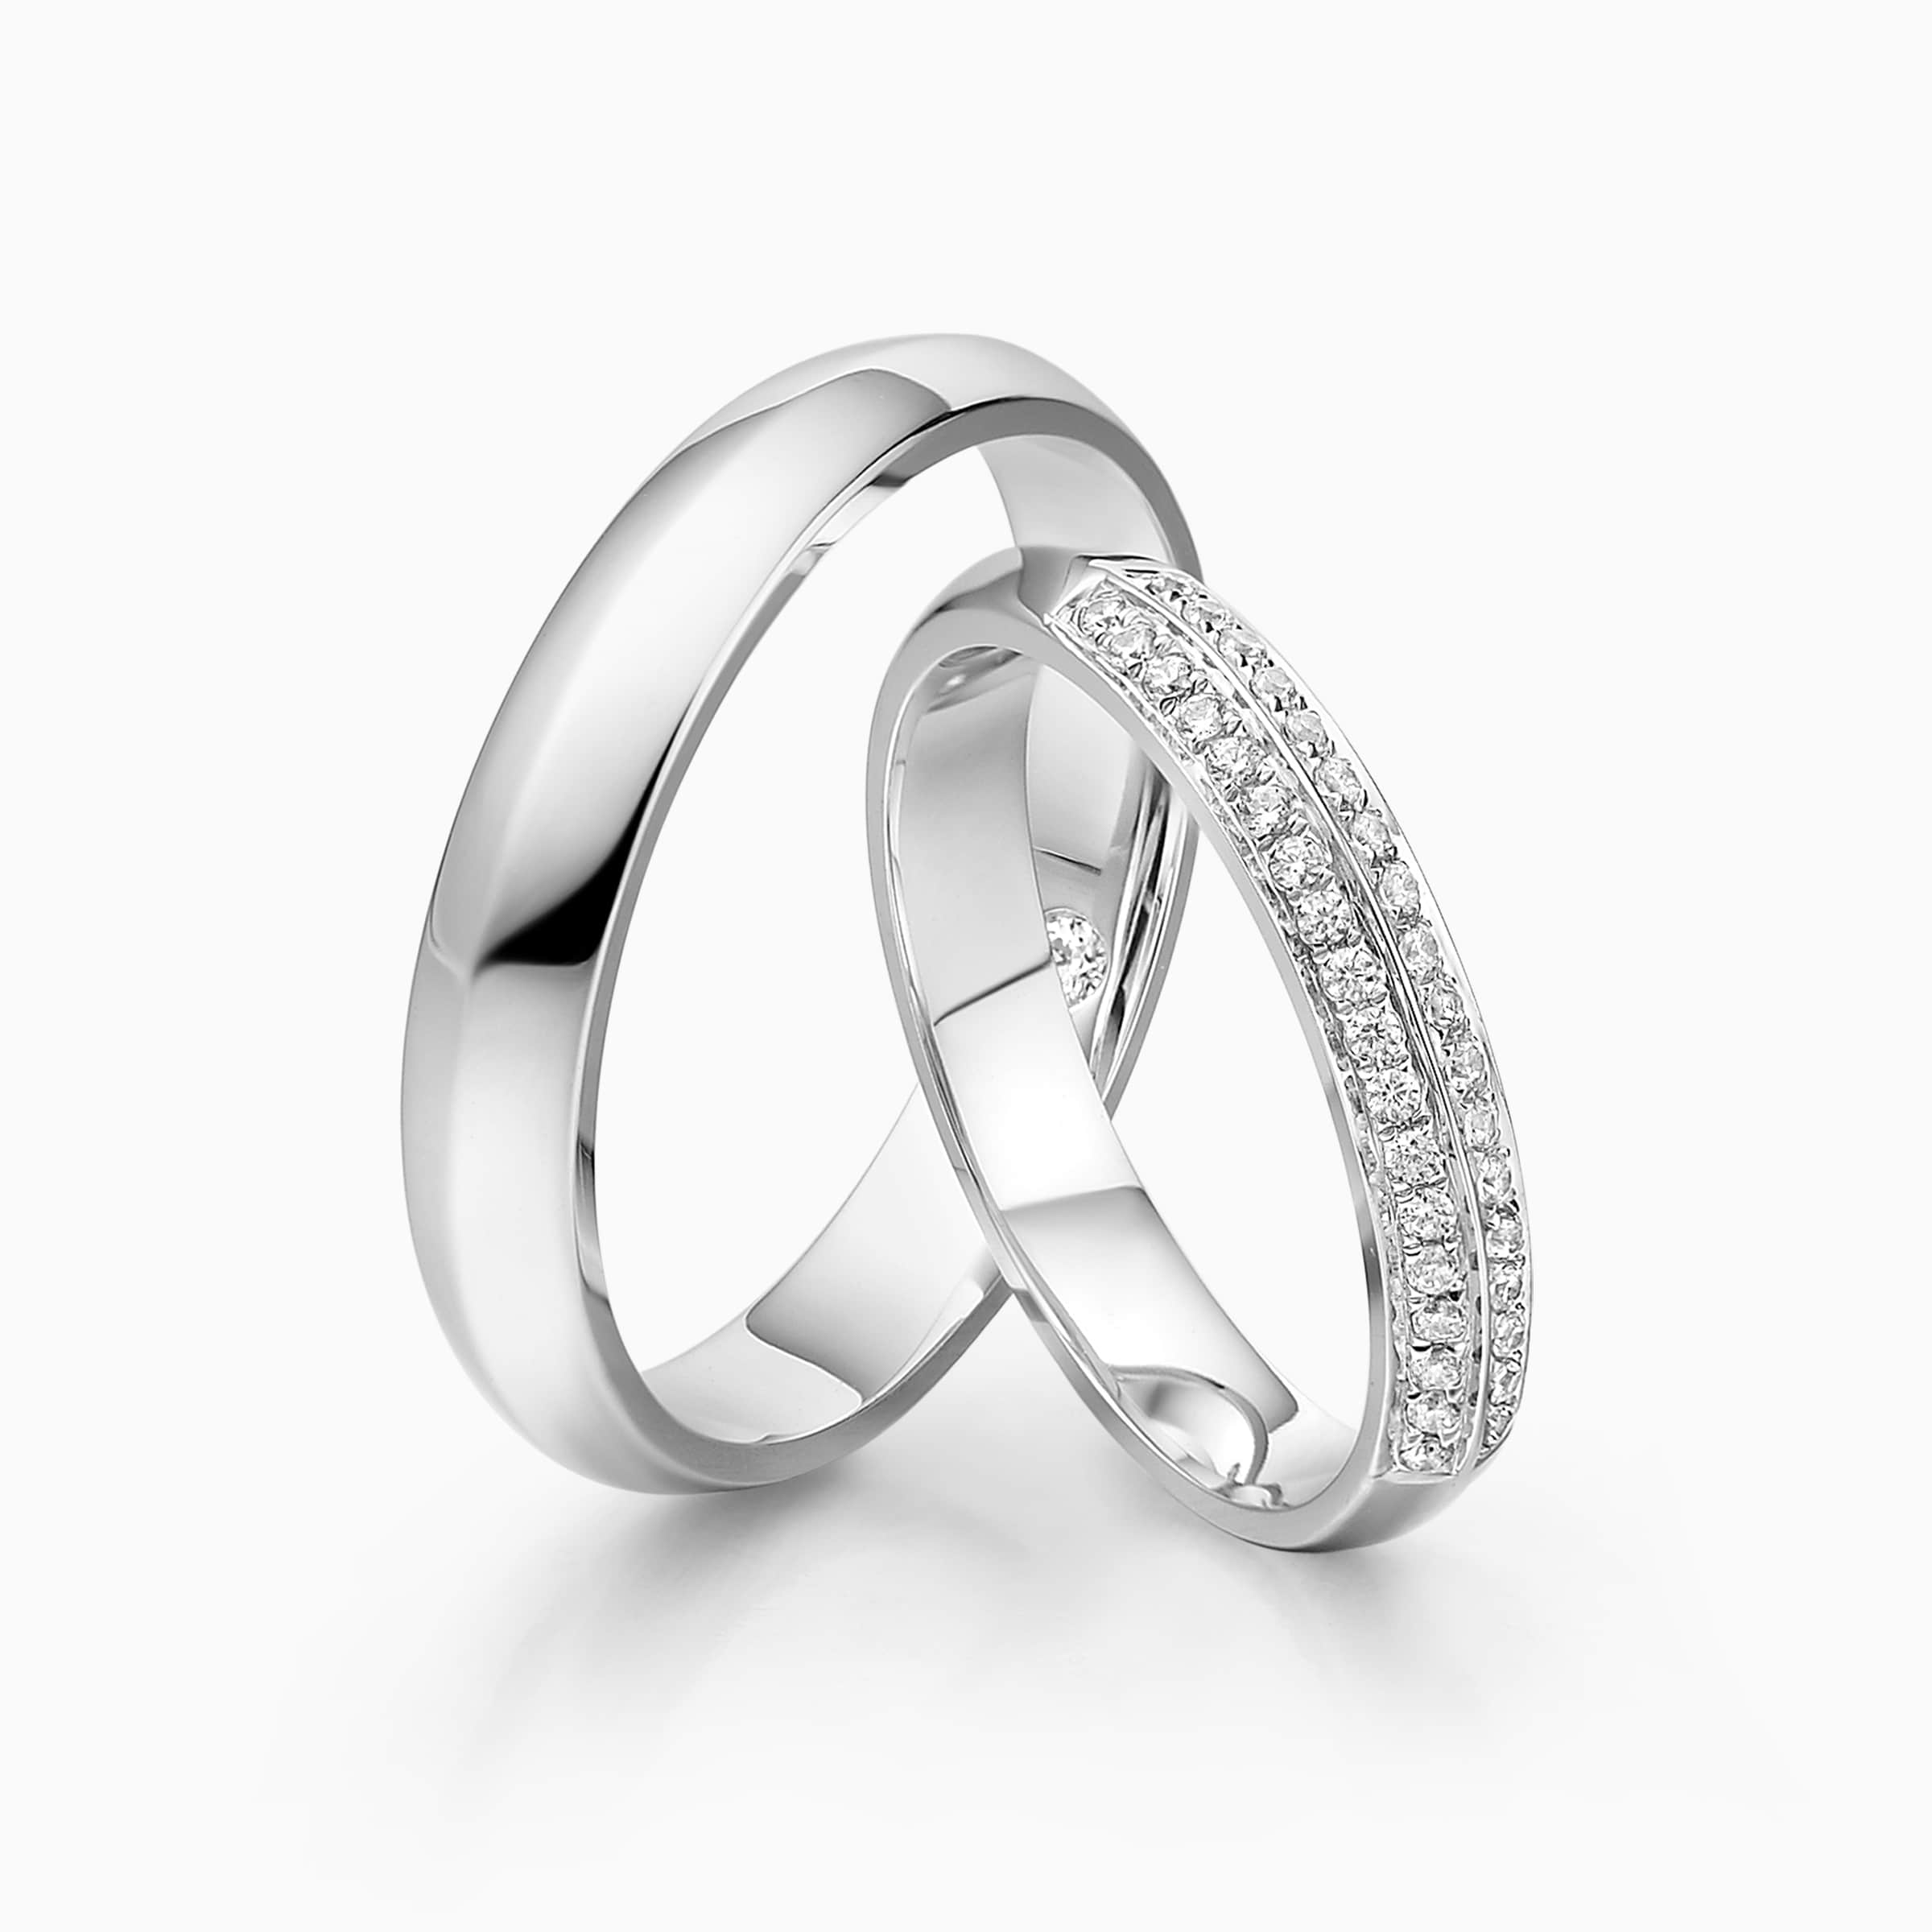 Darry Ring double row wedding bands in white gold